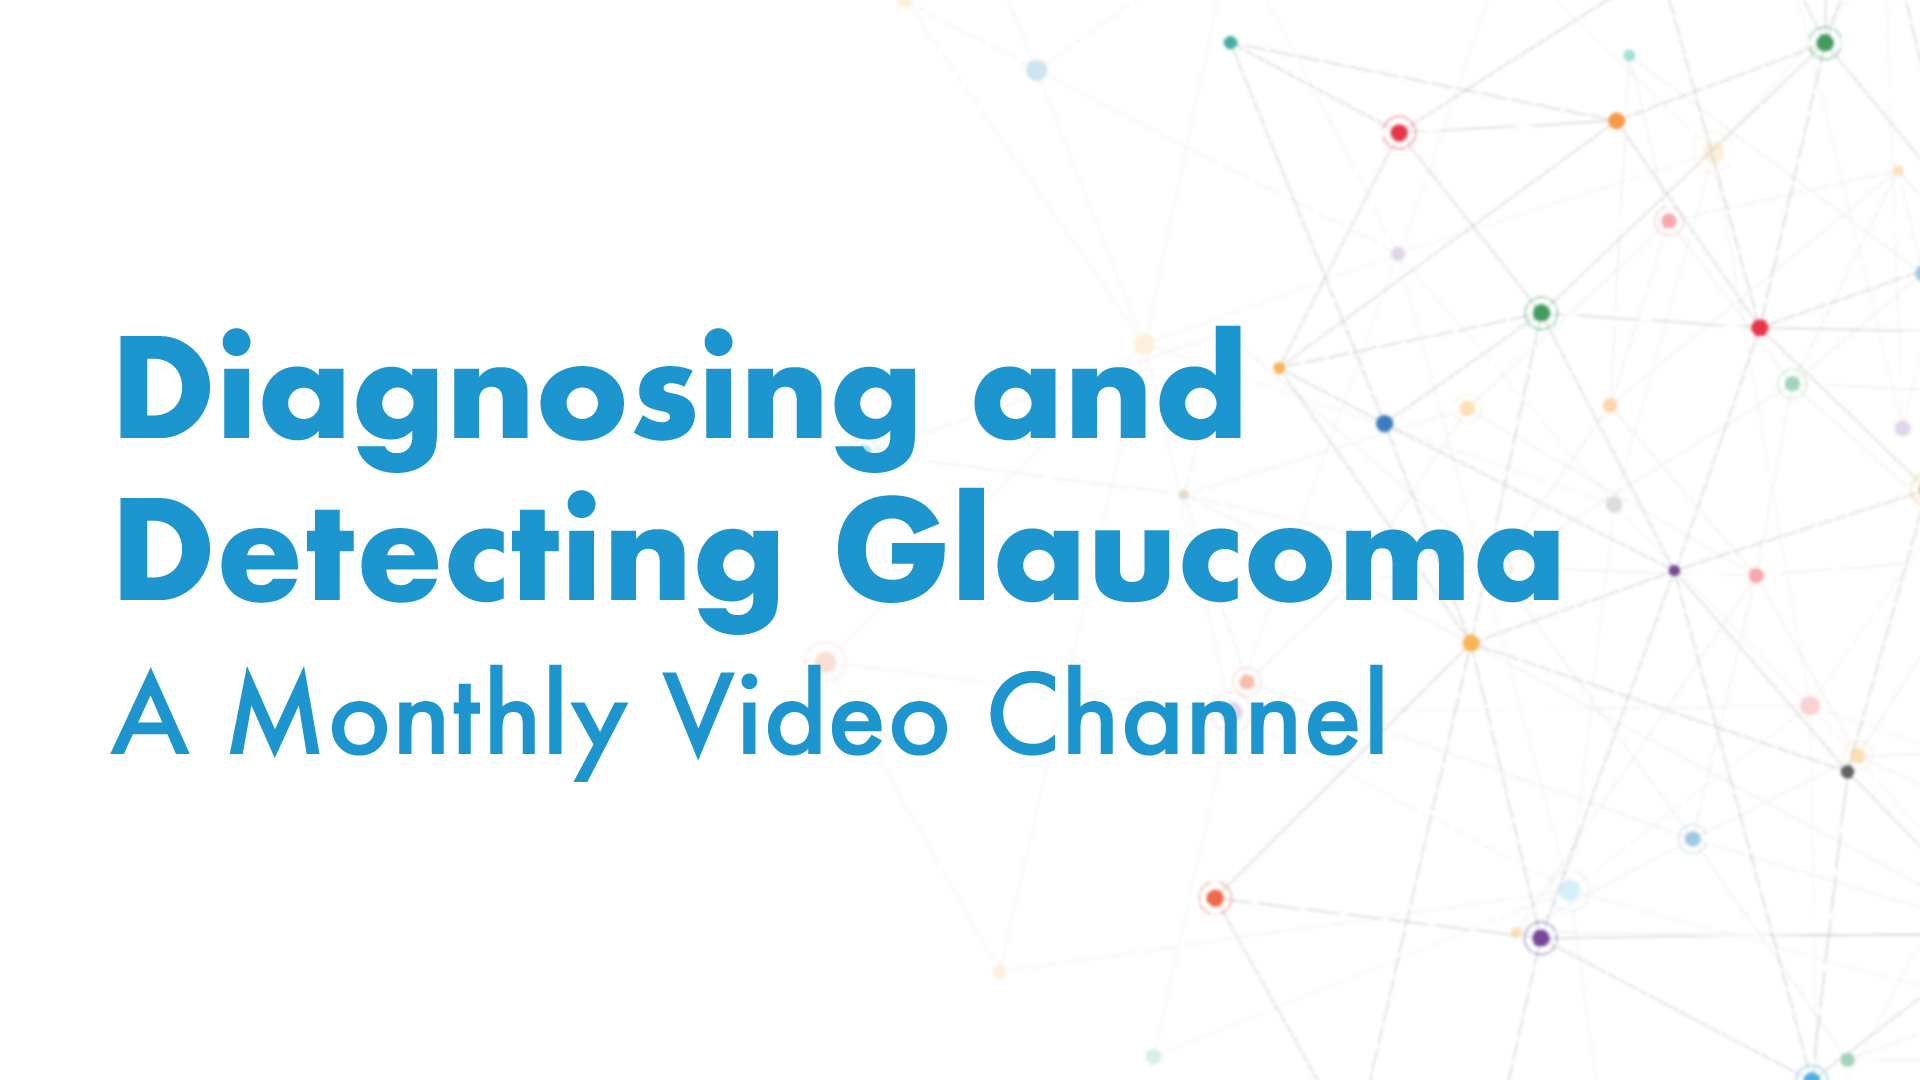 Diagnosing and Detecting Glaucoma: A Monthly Video Channel